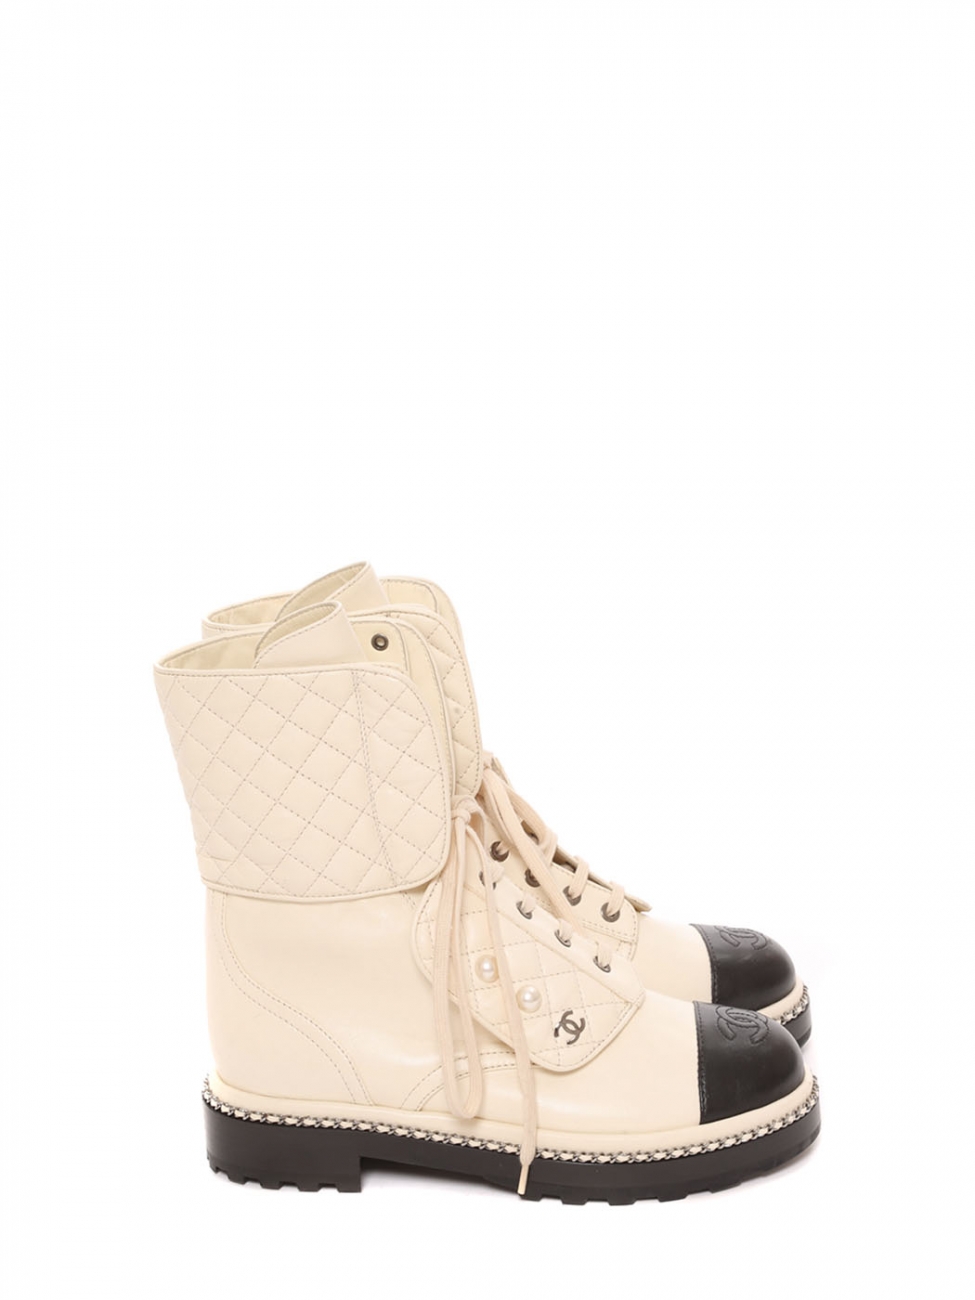 Boutique CHANEL Black and cream white bicolore flat lace-up boots with pearl  details Retail price €2800 Size 